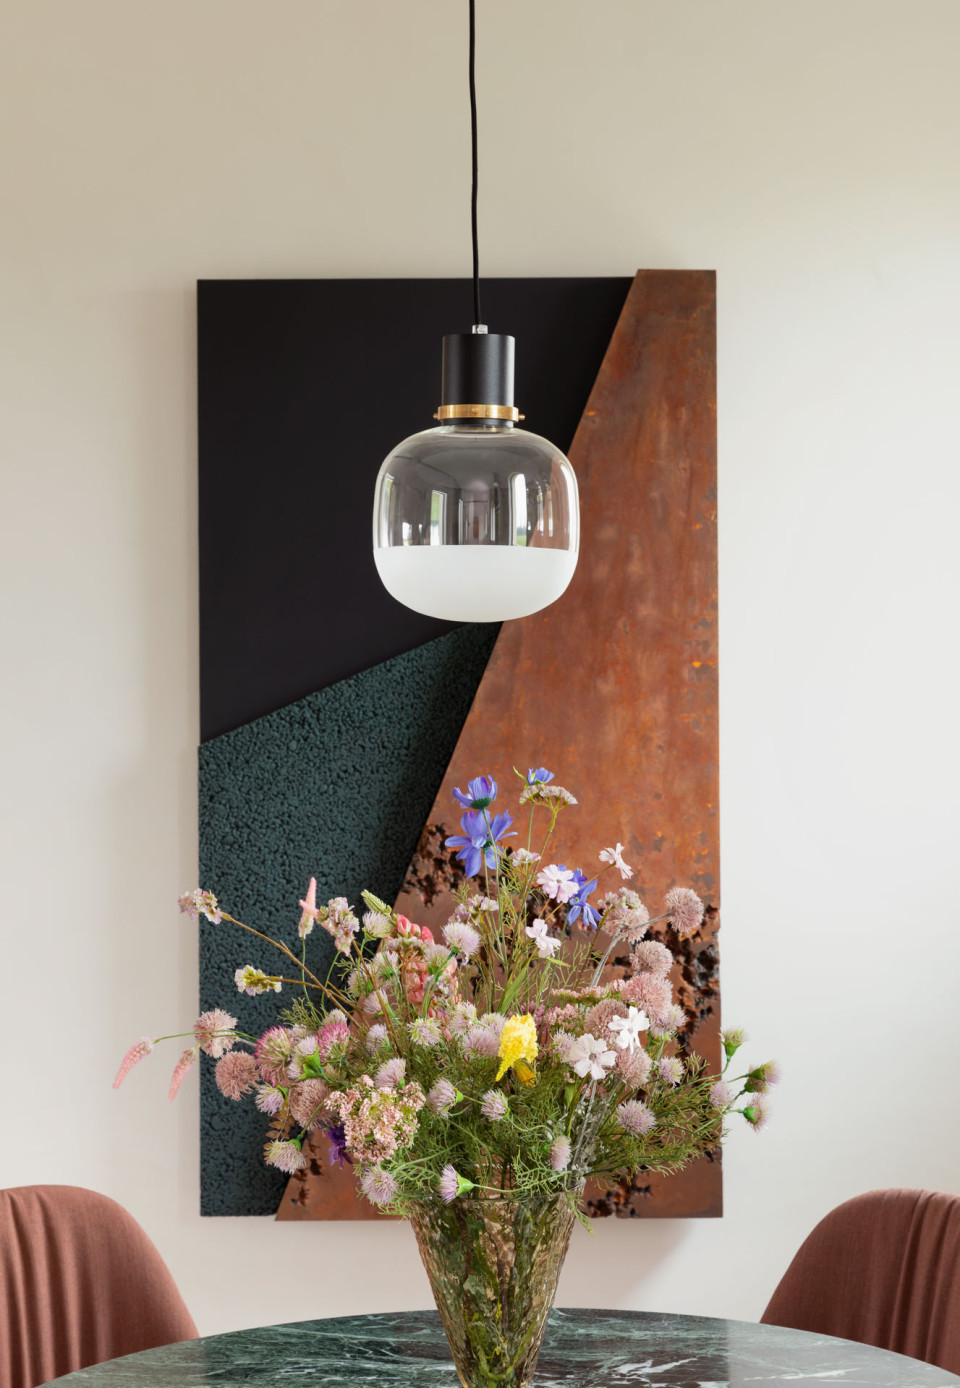 Ghost suspension lamp by Midj